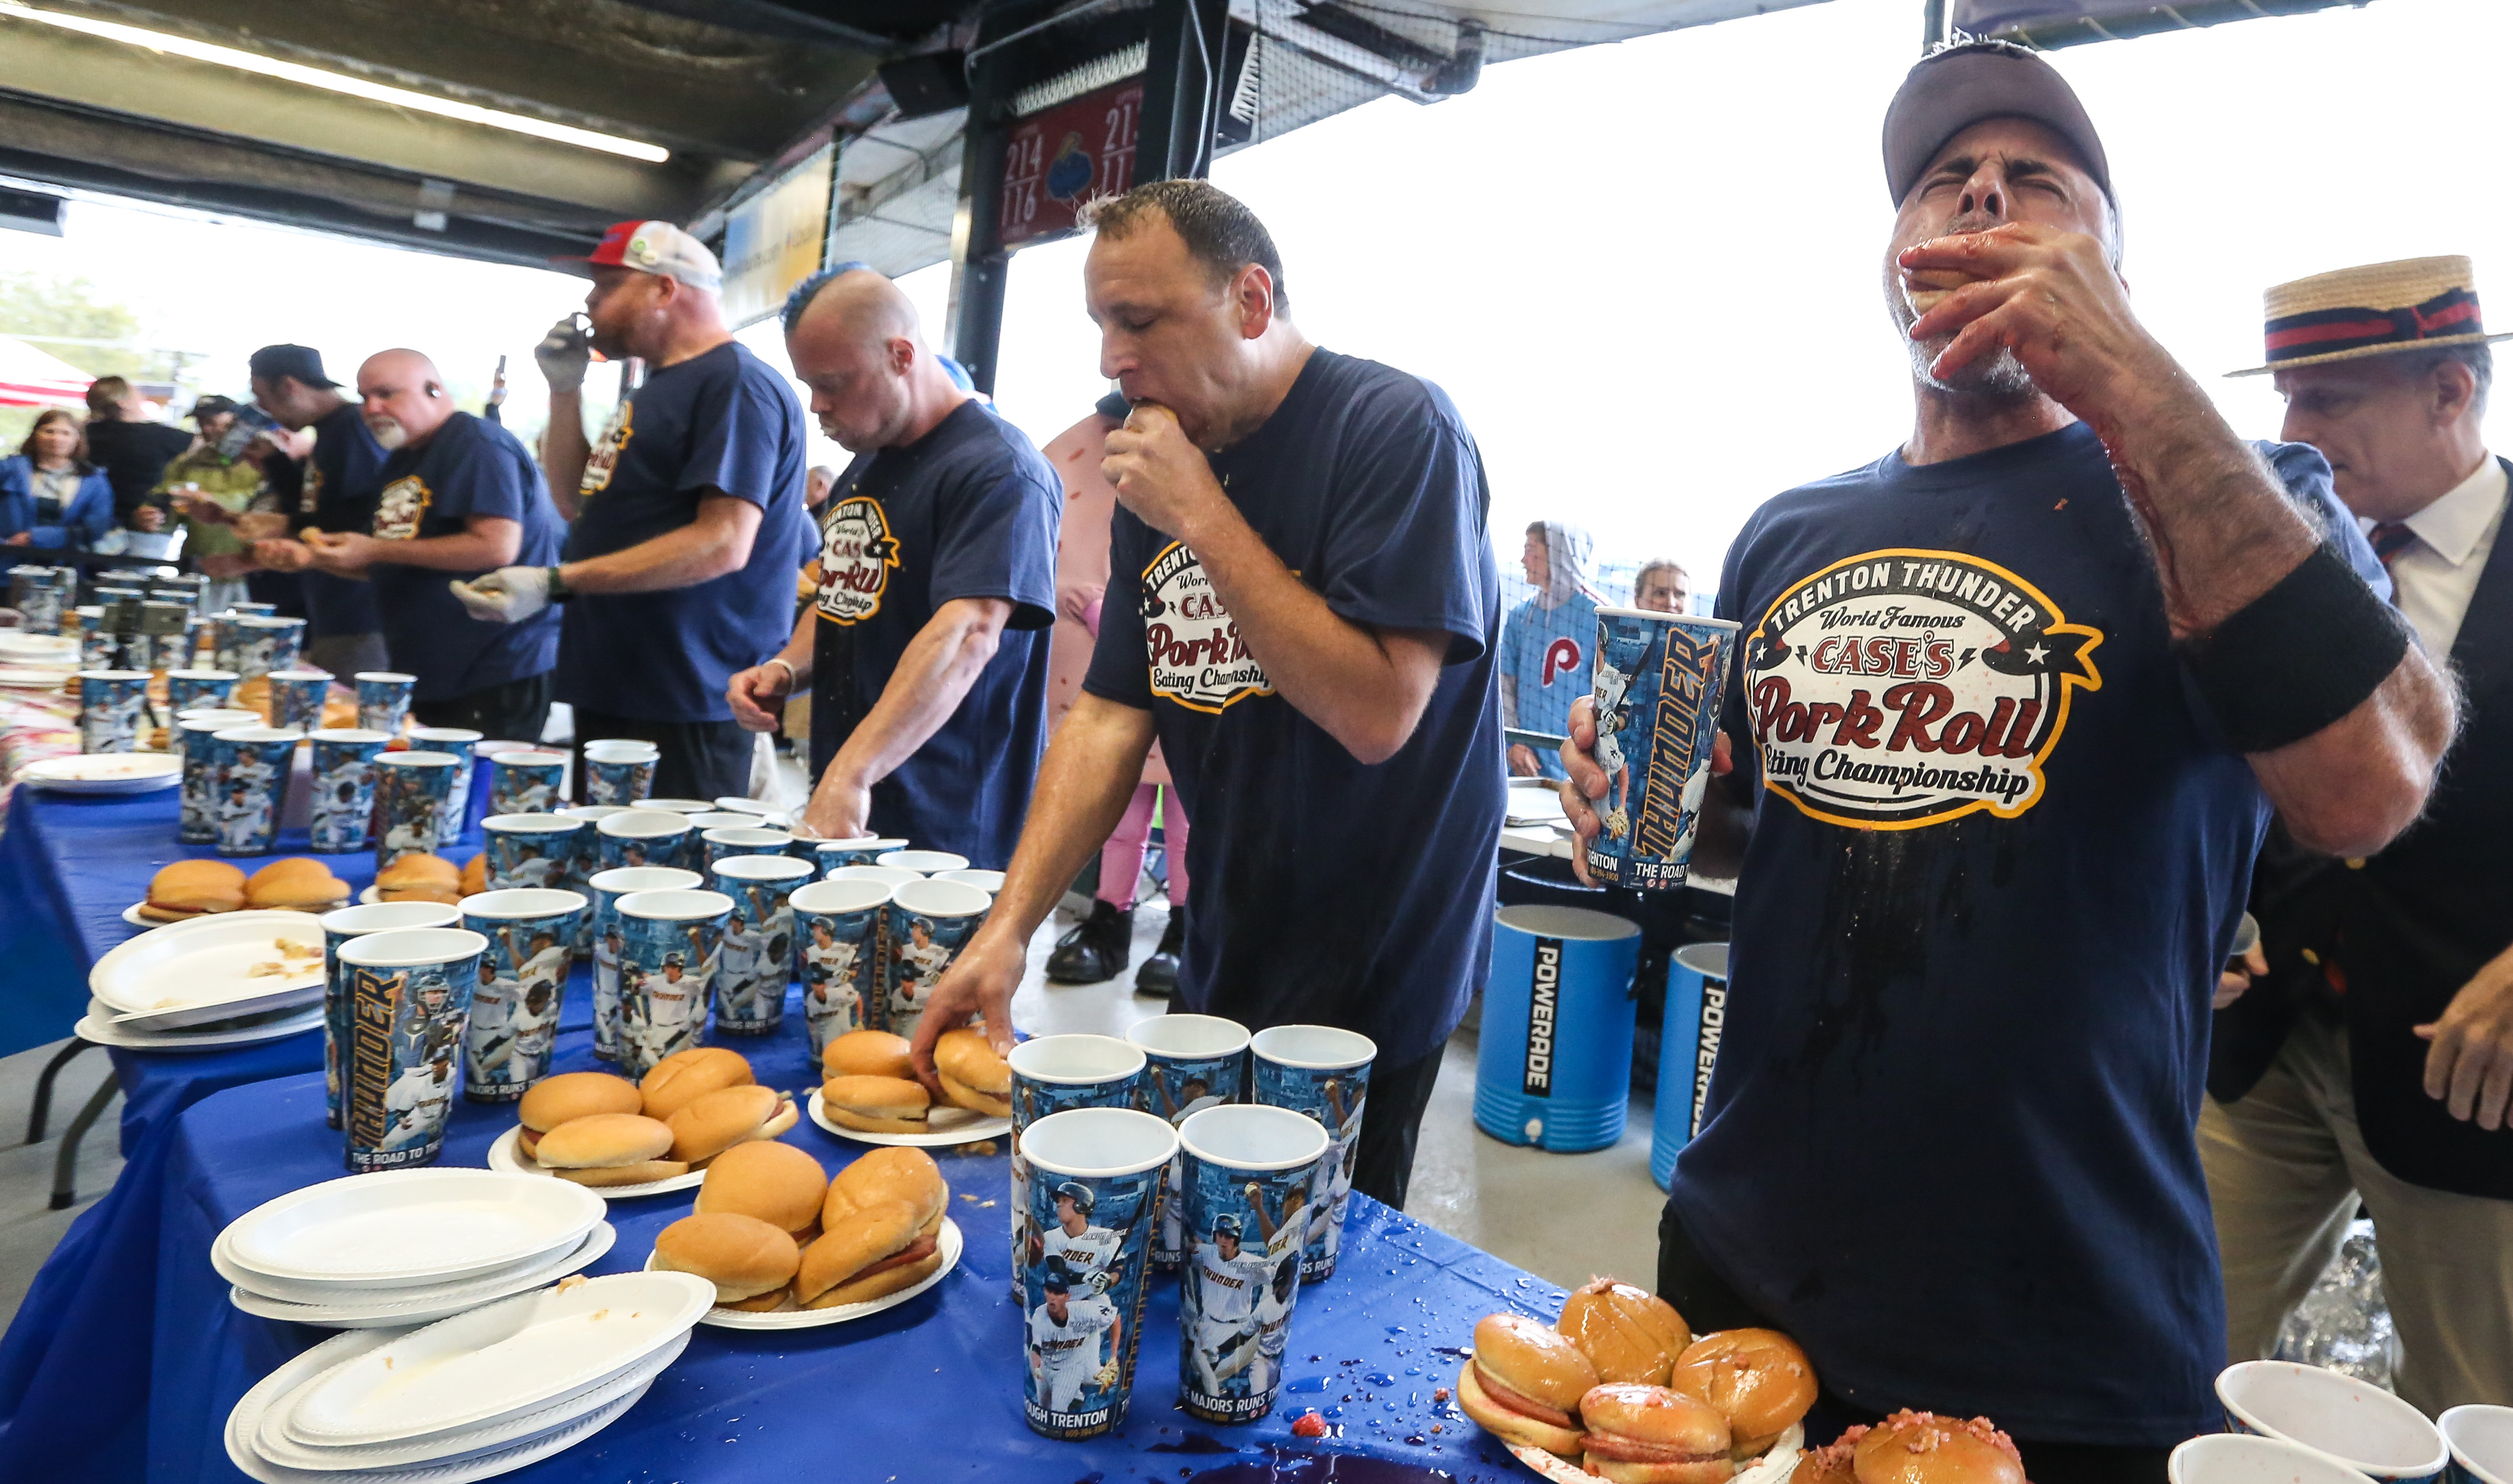 Trenton Thunder become Pork Roll, a New Jersey delicacy